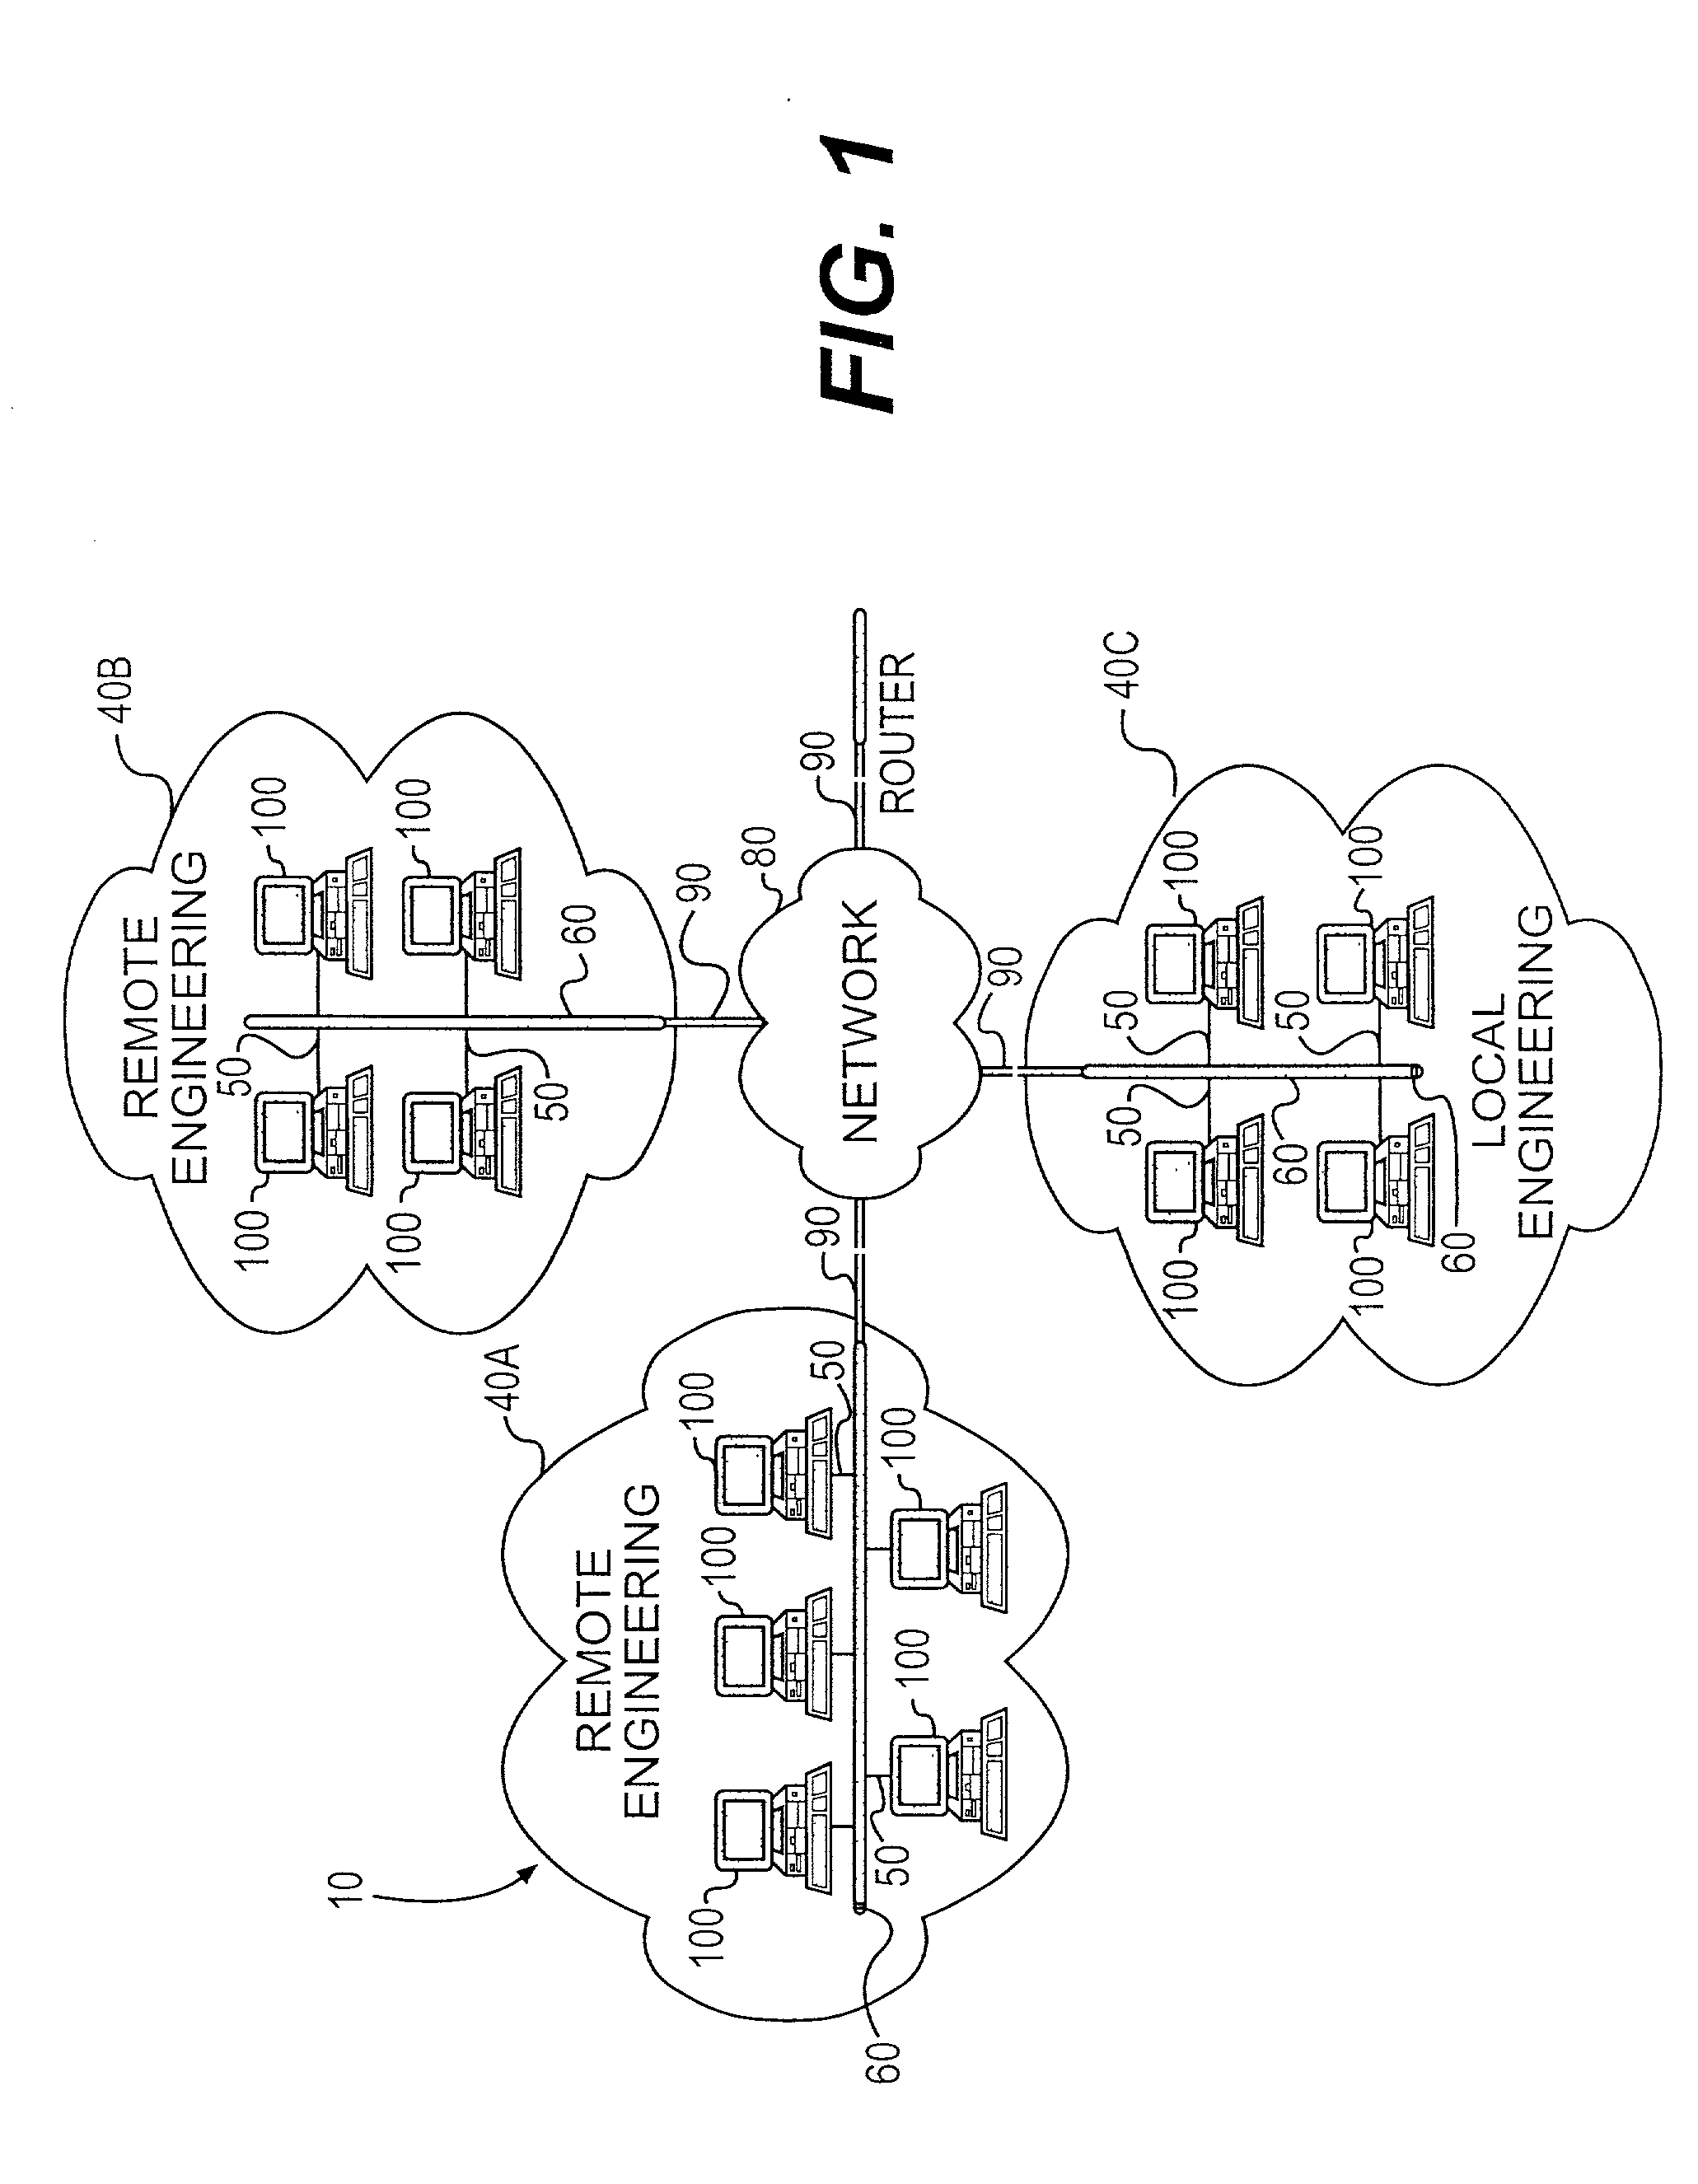 System and method for intelligent wire testing